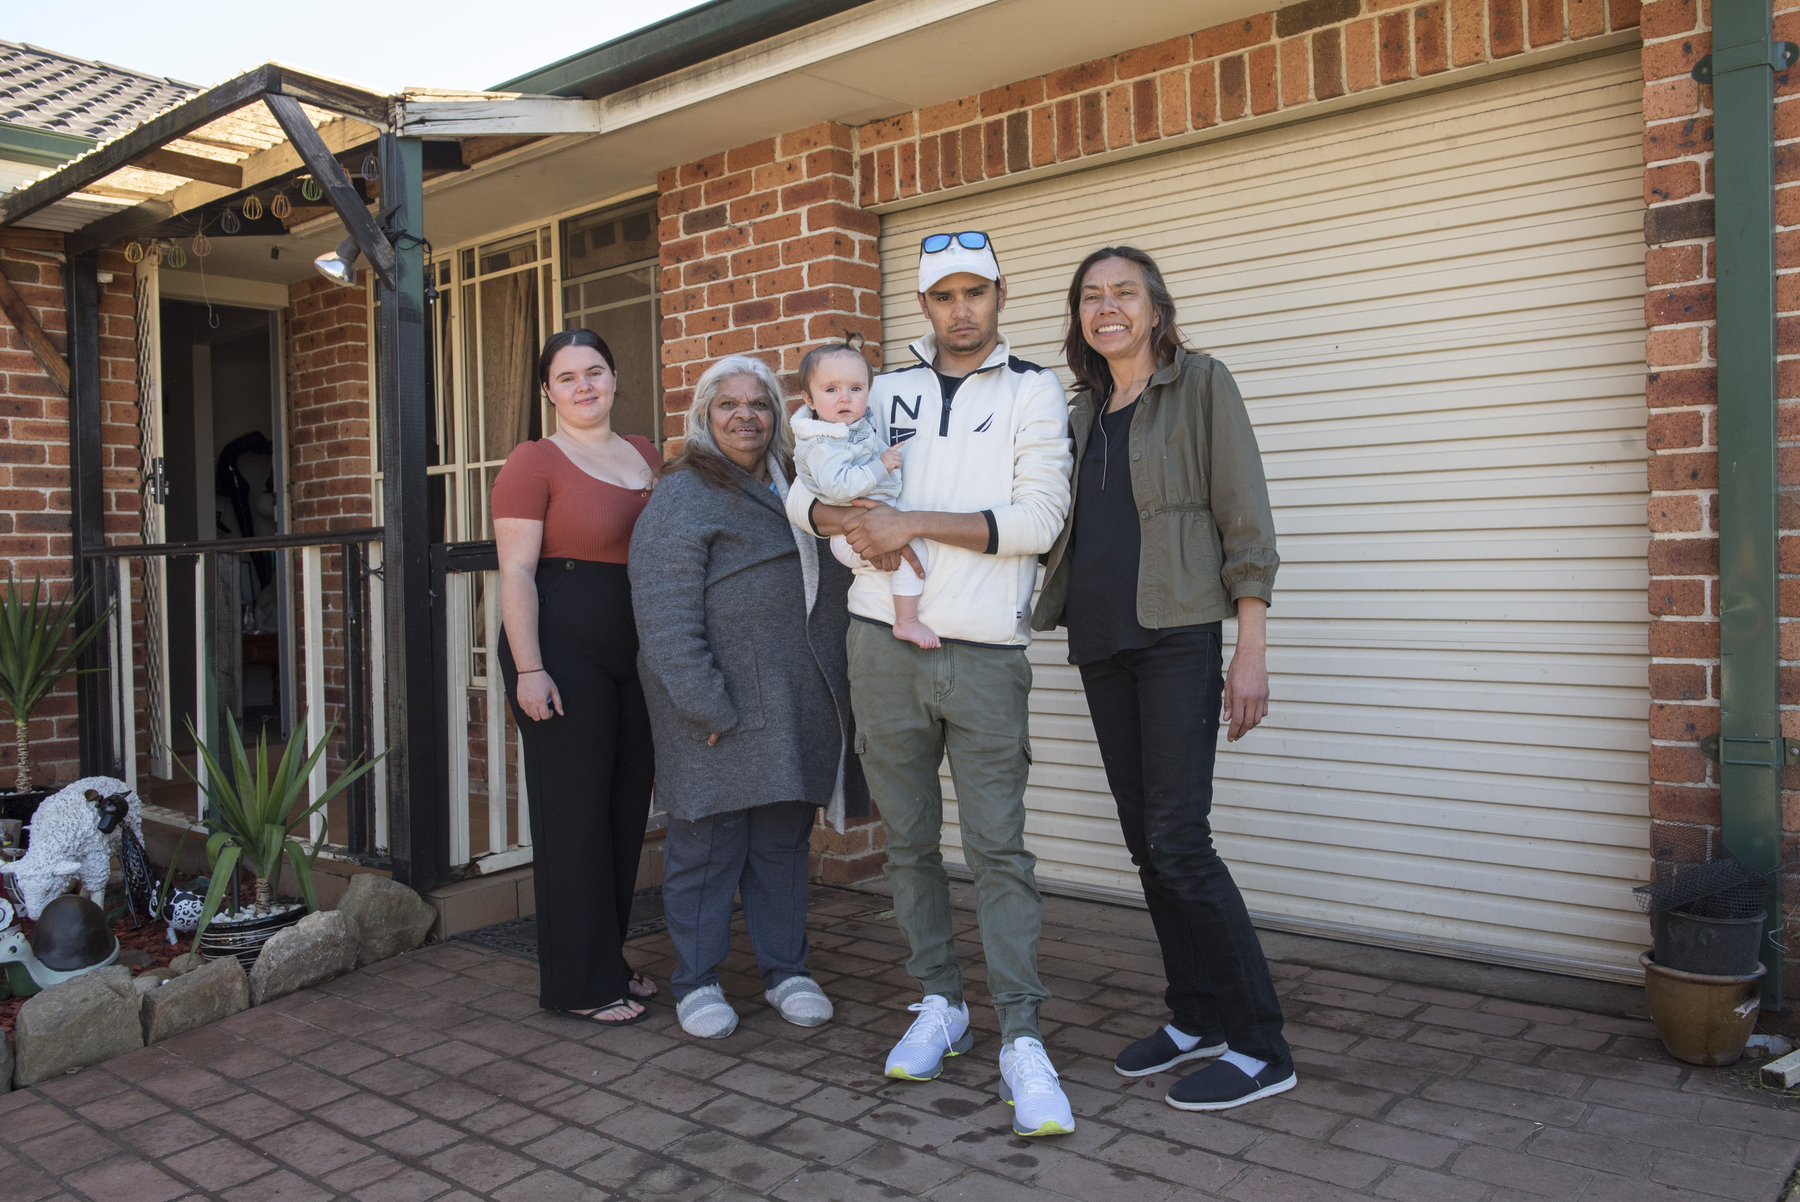 An Aboriginal family holding a baby stand in front of their house